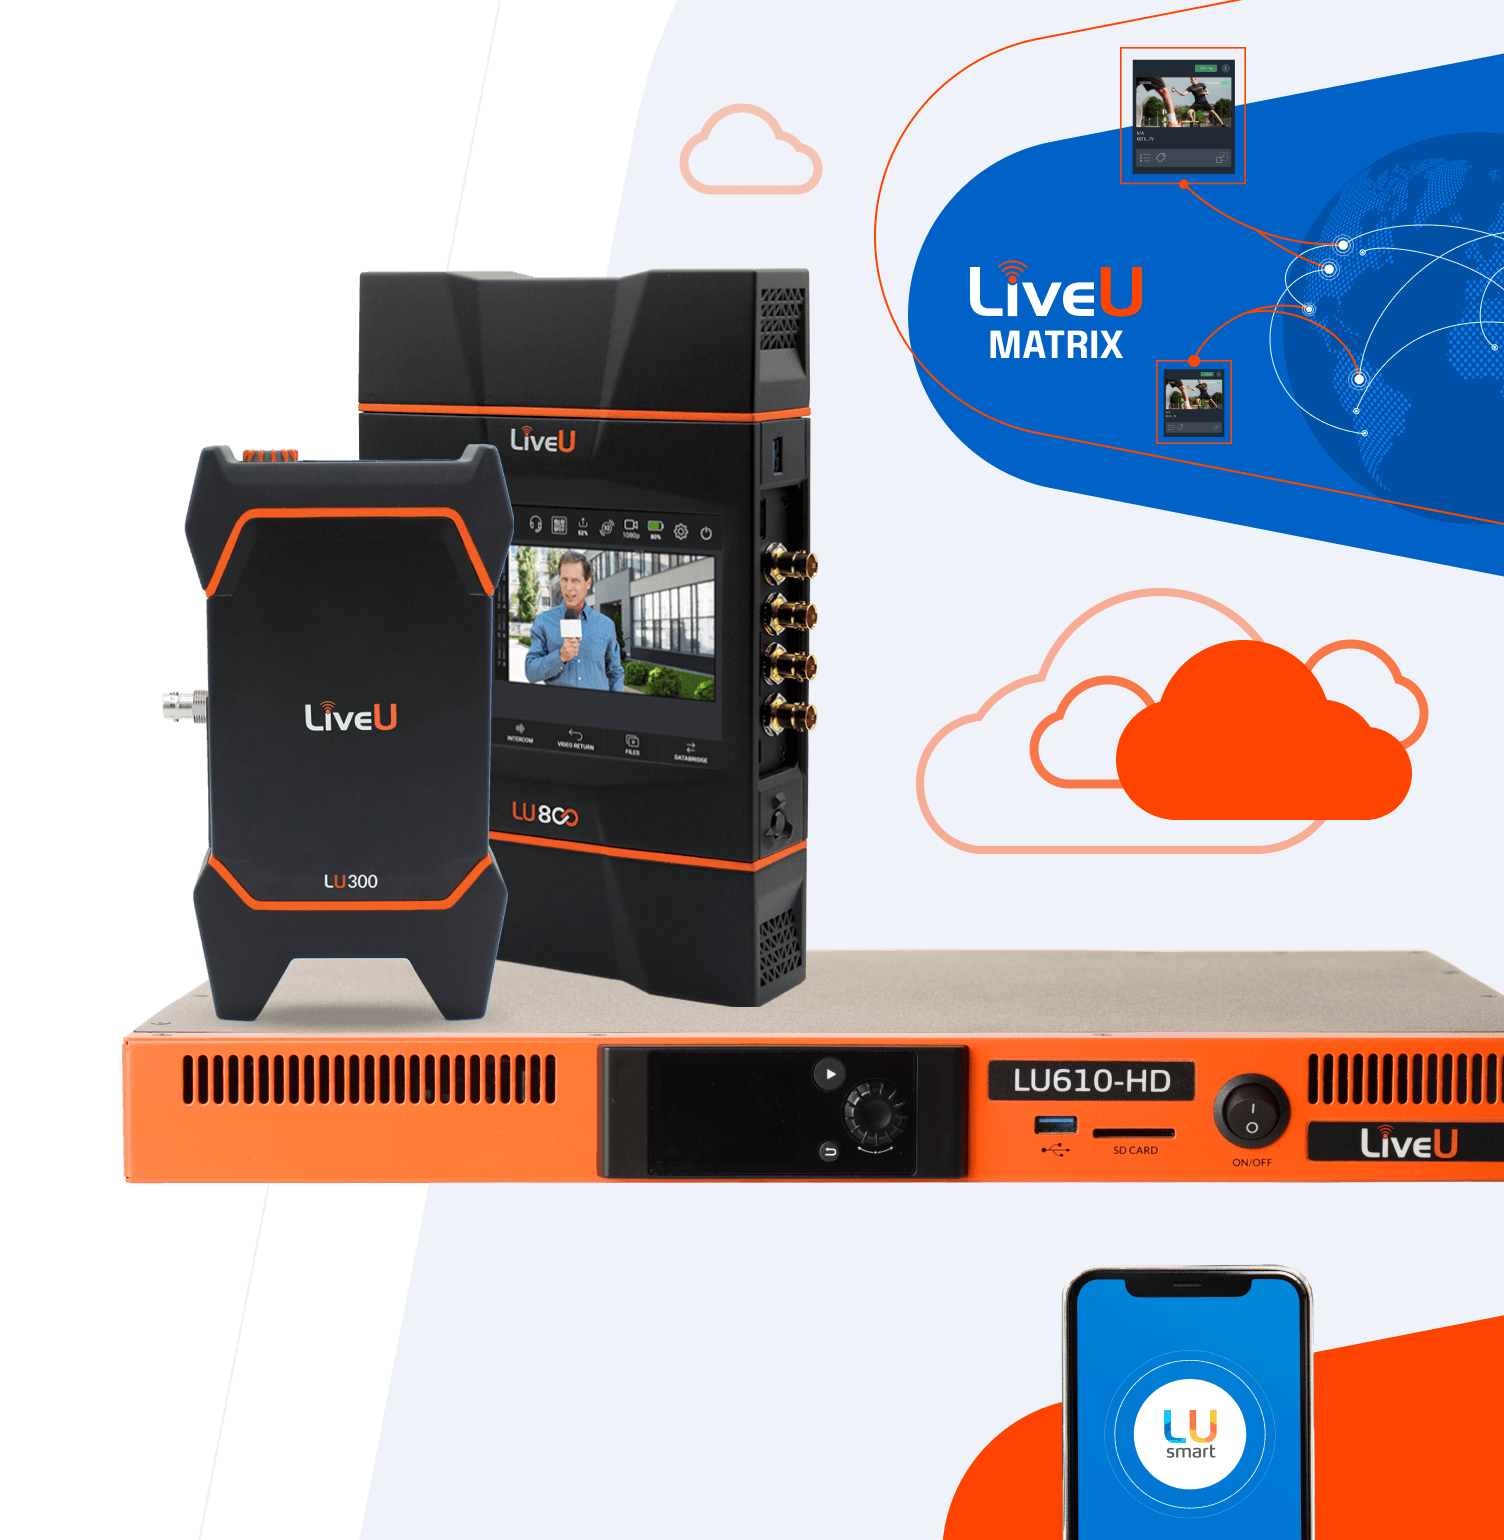 End-to-end live video broadcasting solutions